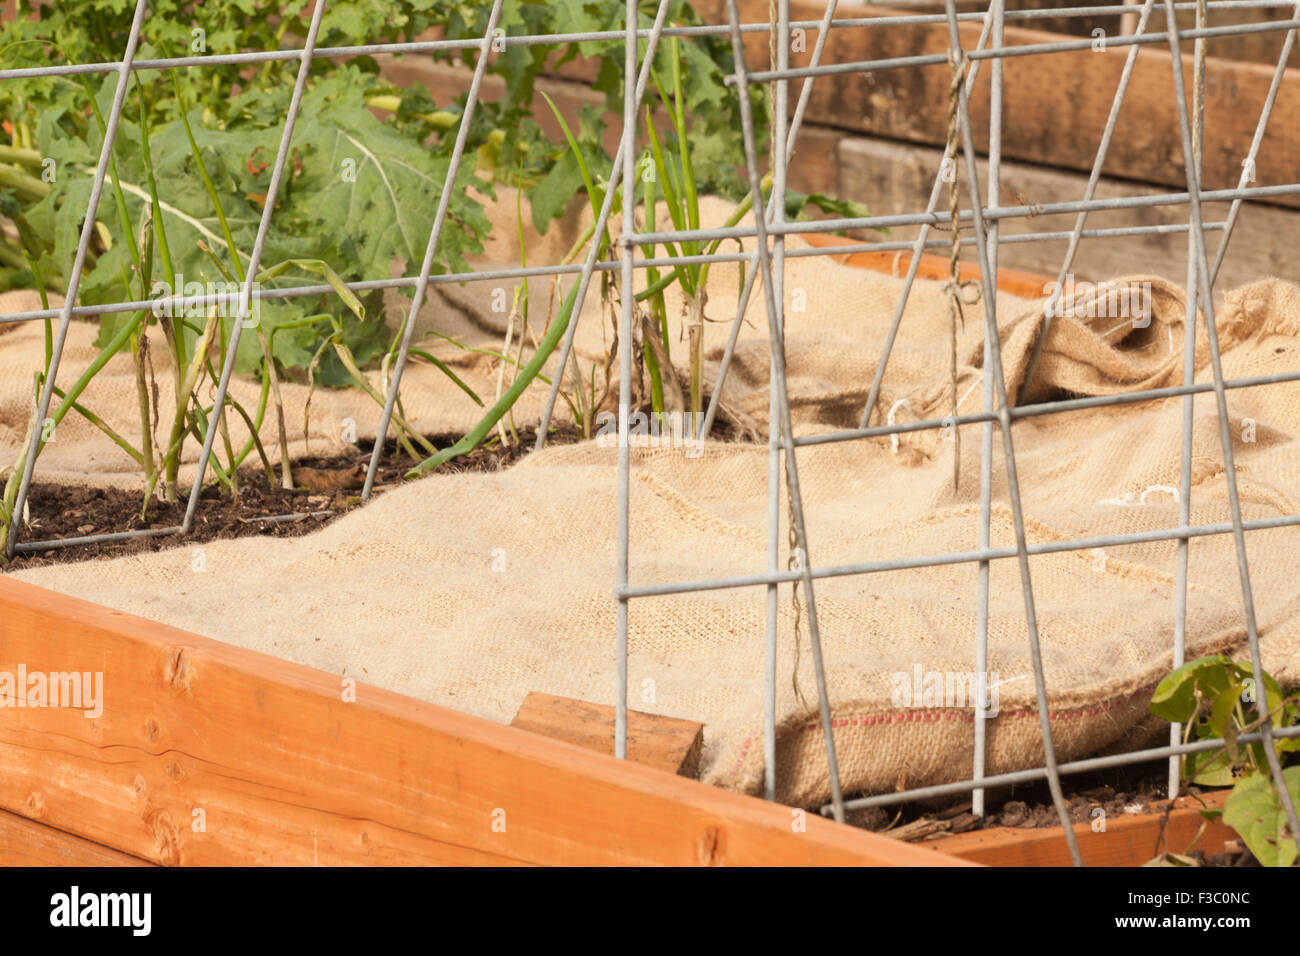 Raised vegetable beds prepared for dormancy with burlap bags placed on them, in a garden in Bellevue, Washington, USA Stock Photo